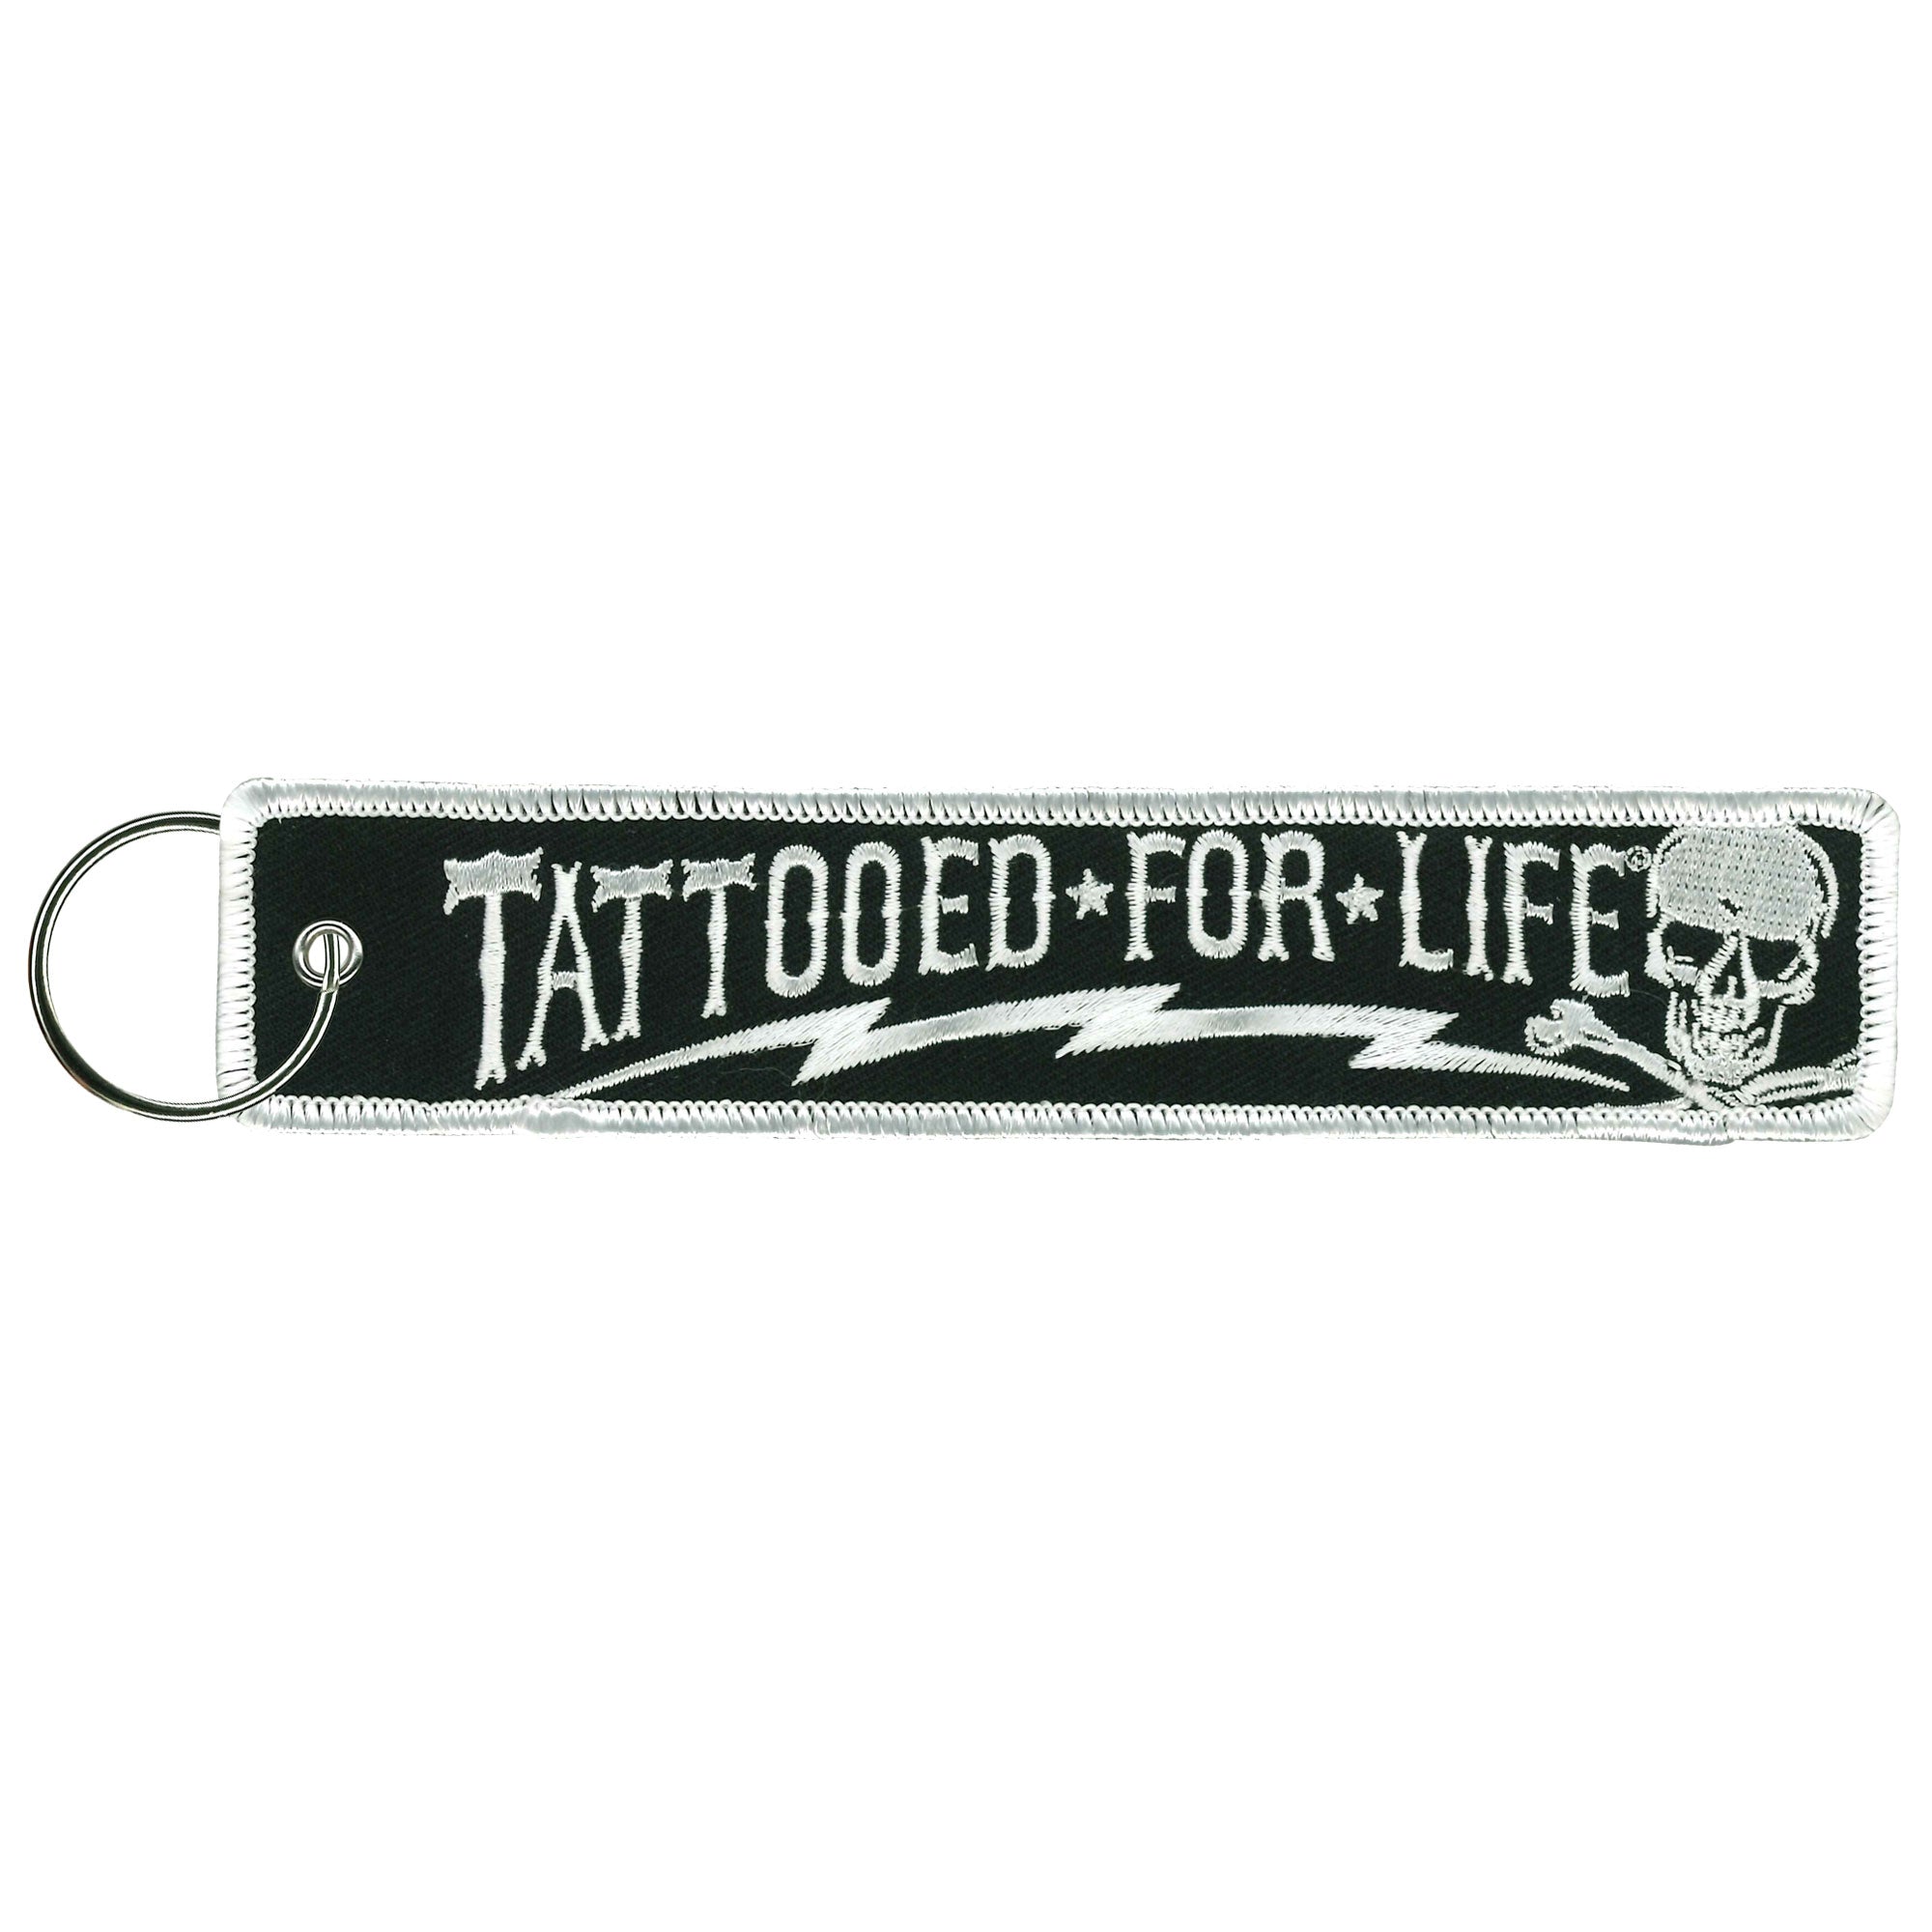 Hot Leathers Tattooed For Life Key Chain Fob